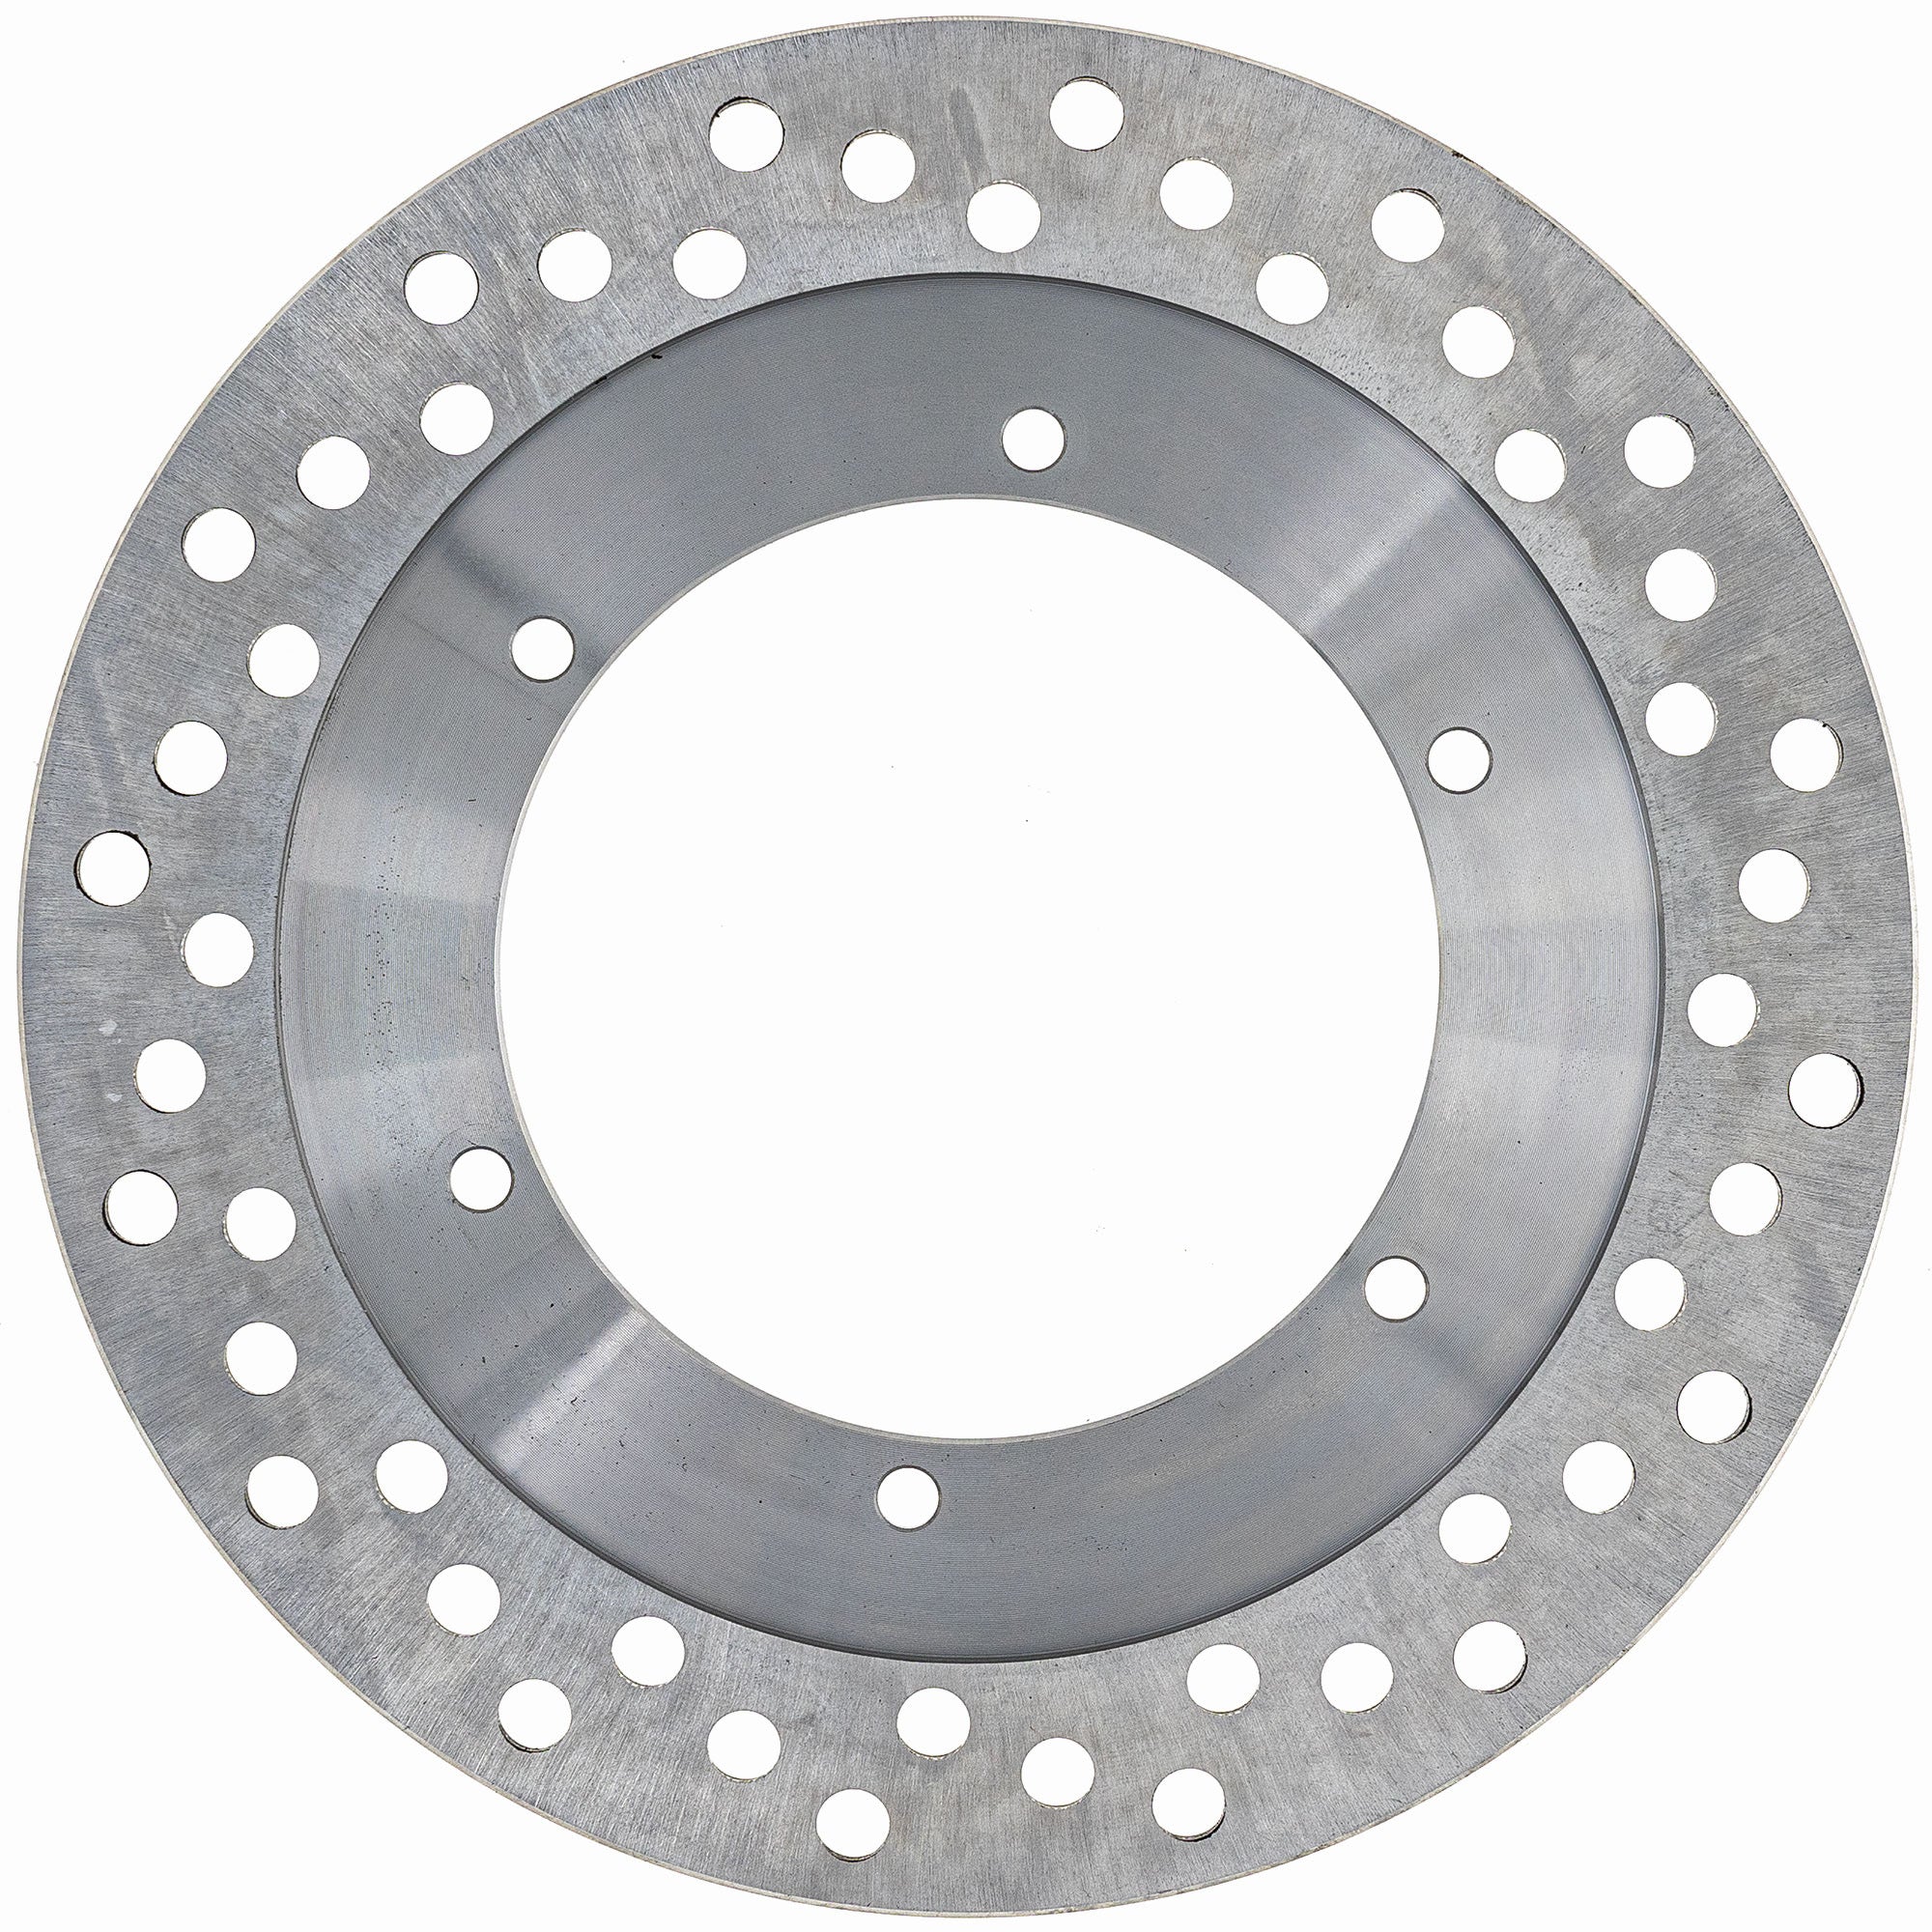 Front Brake Rotor 519-CRT2508R For Yamaha 31A-25831-51-00 31A-25831-11-00 31A-25831-01-00 | 2-PACK